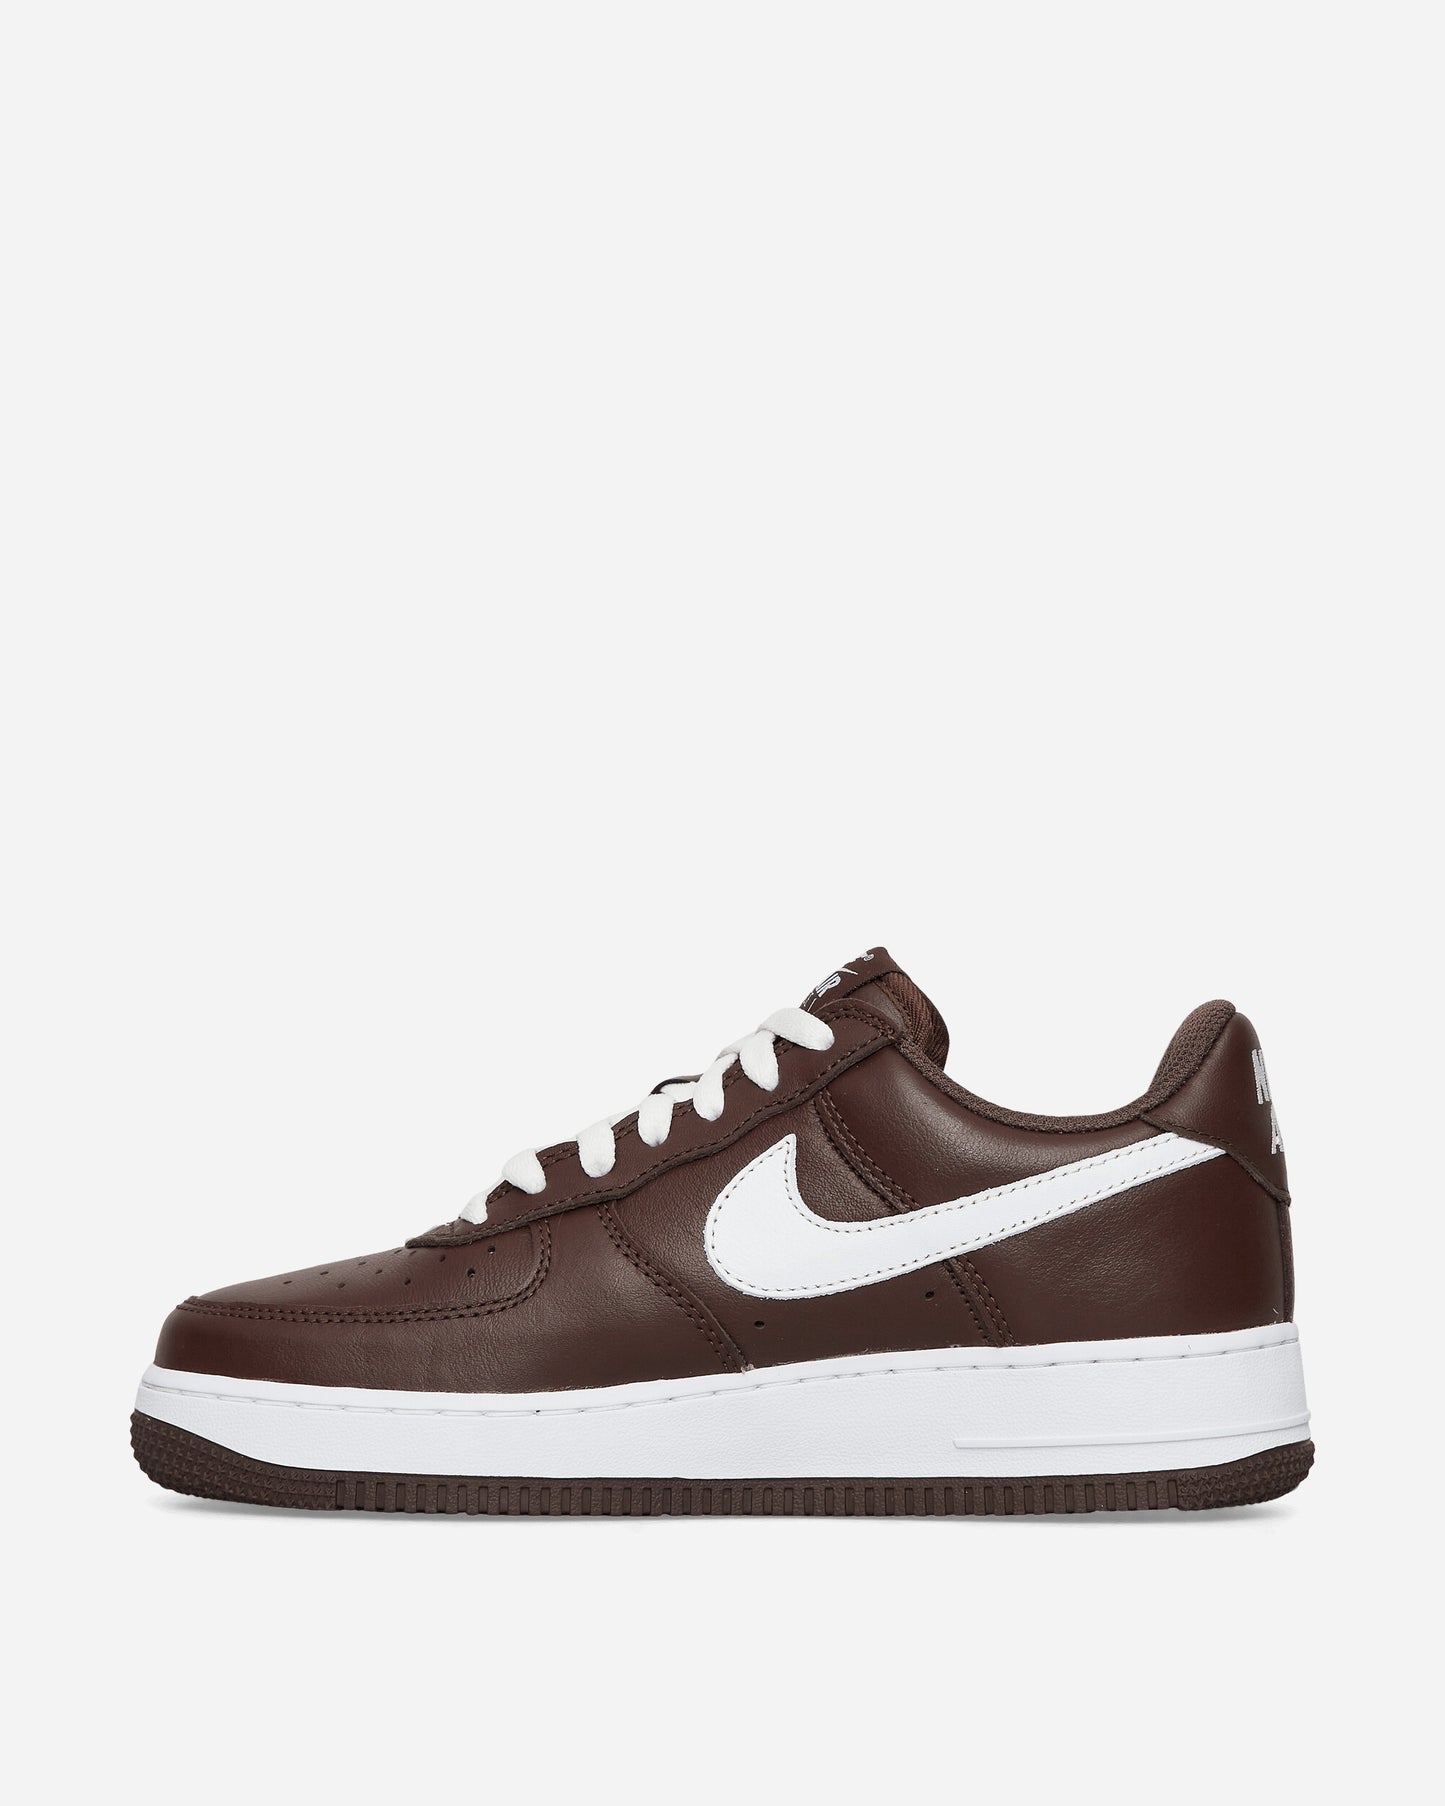 Nike Air Force 1 Low Retro Qs Chocolate/White Sneakers Low FD7039-200